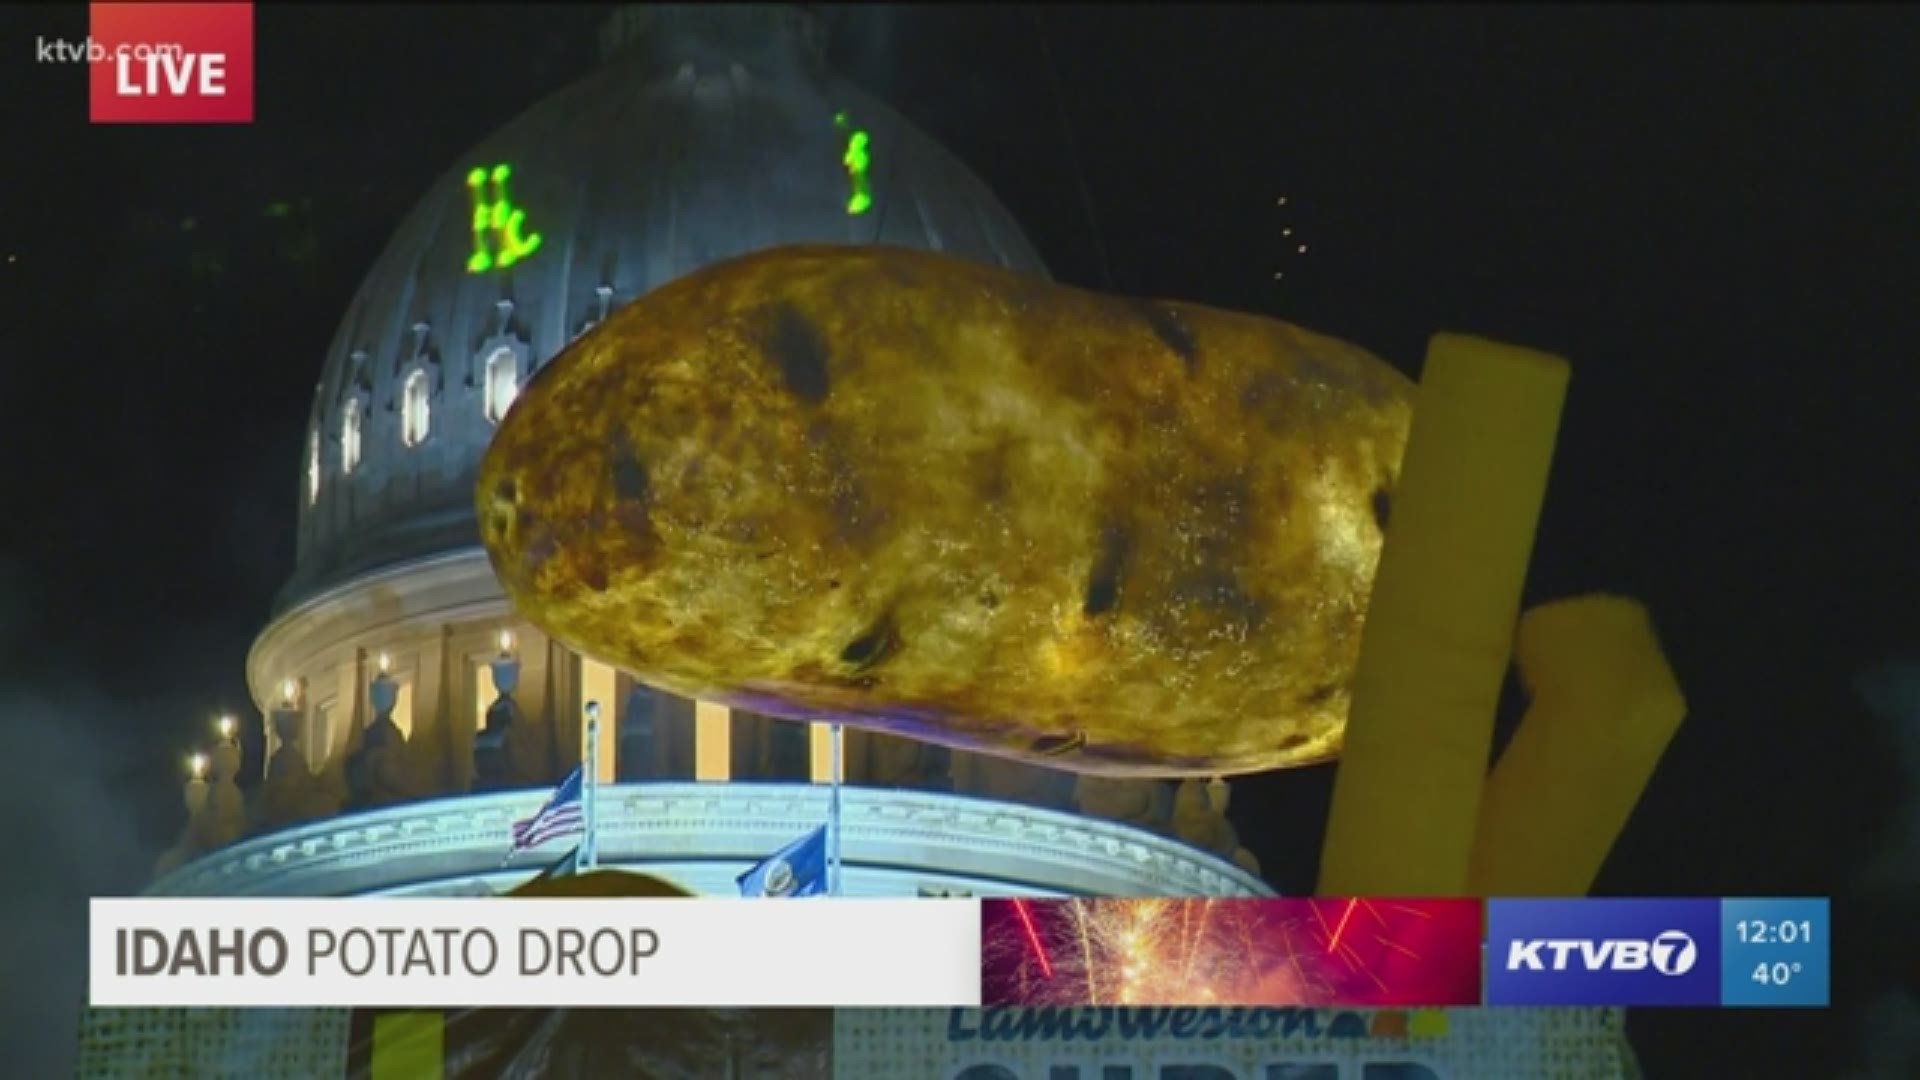 Watch Idaho Potato Drop rings in the new year in downtown Boise